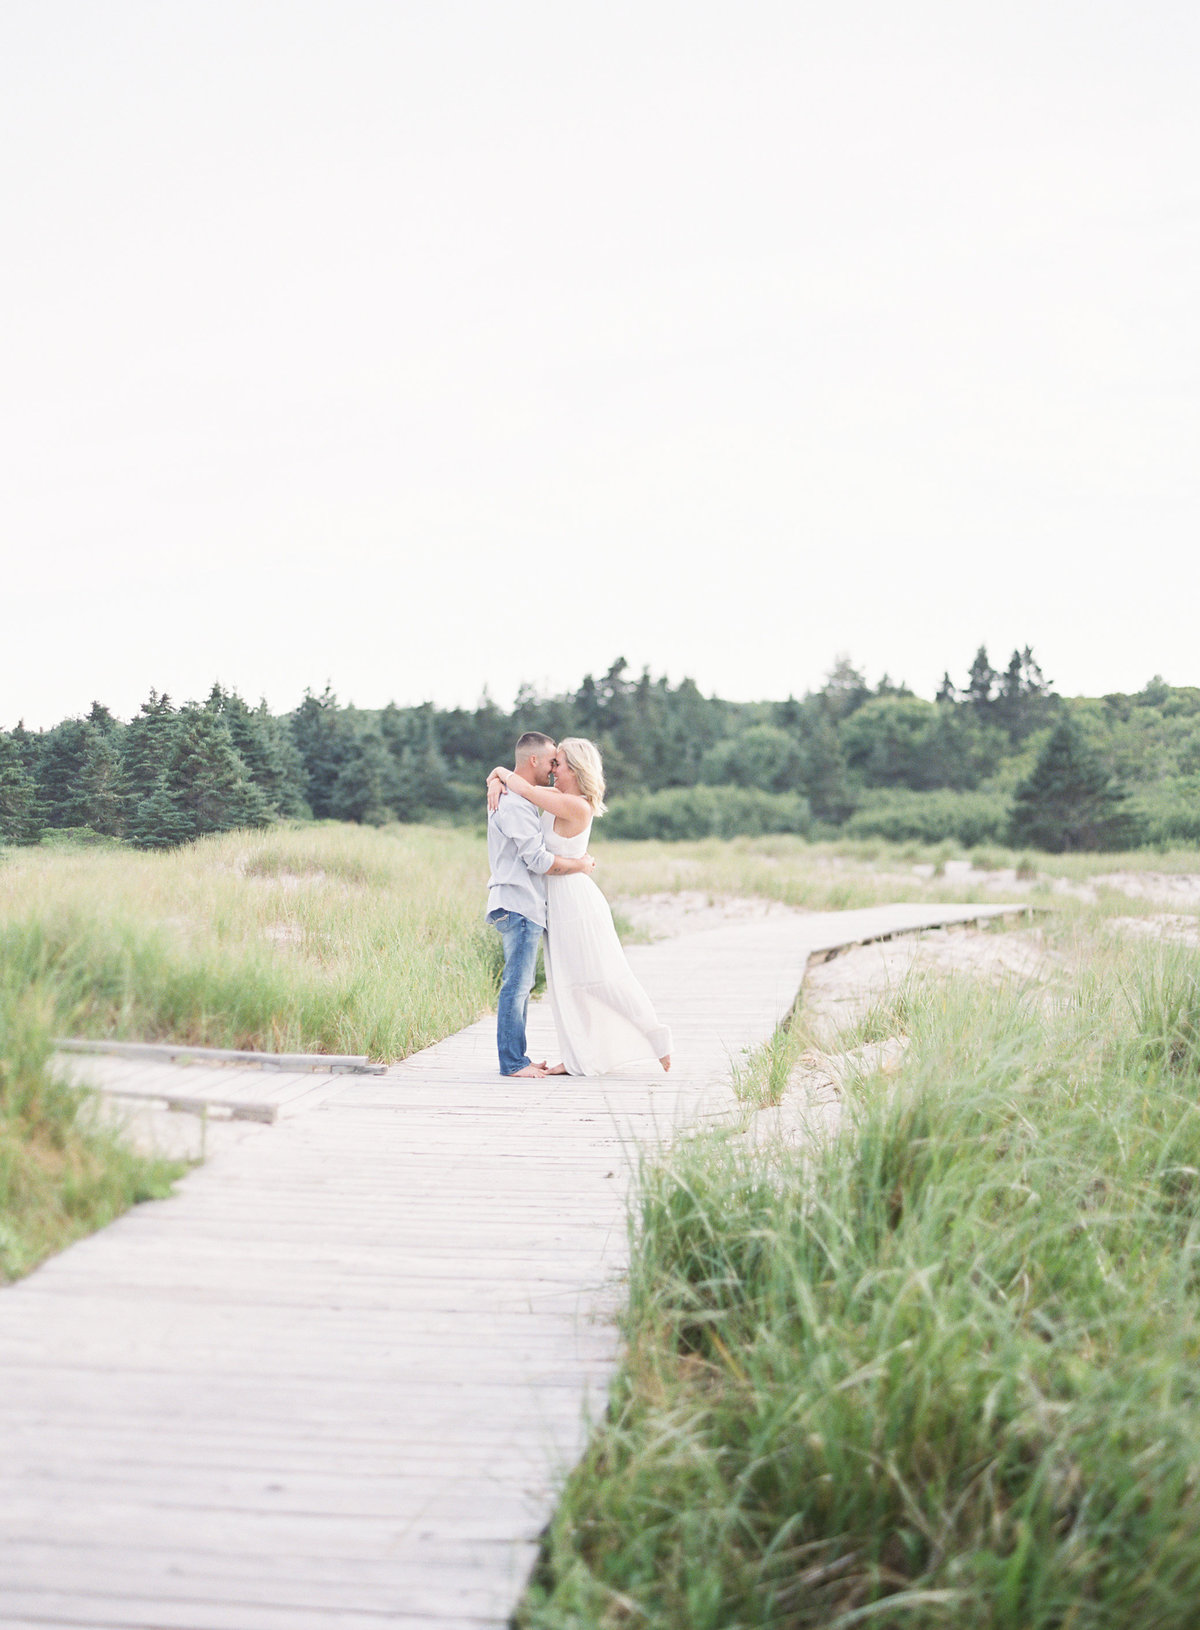 Jacqueline Anne Photography  - Hailey and Shea - Crystal Crescent Beach Engagement-5